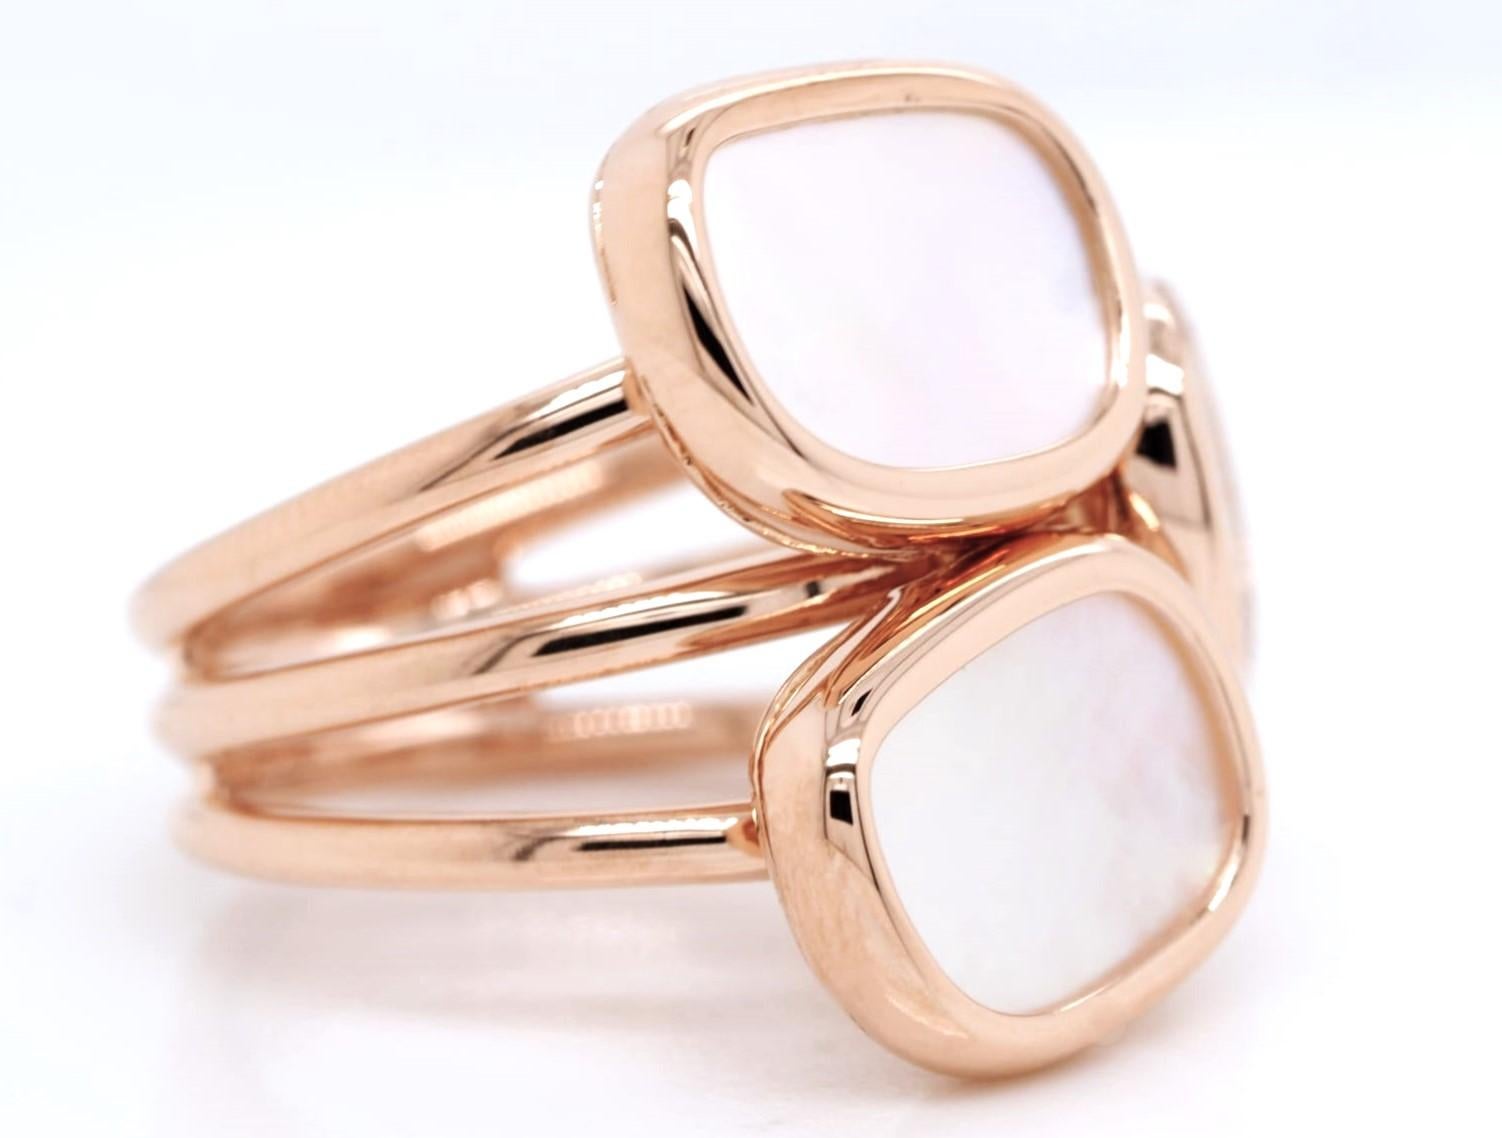 This stunning Roberto Coin triple ring from the Jade Collection features a lustrous mother of pearl and 0.14 ct round diamond set in 18k rose gold. The pavé setting style adds an extra touch of elegance to this luxurious piece. The ring is a size